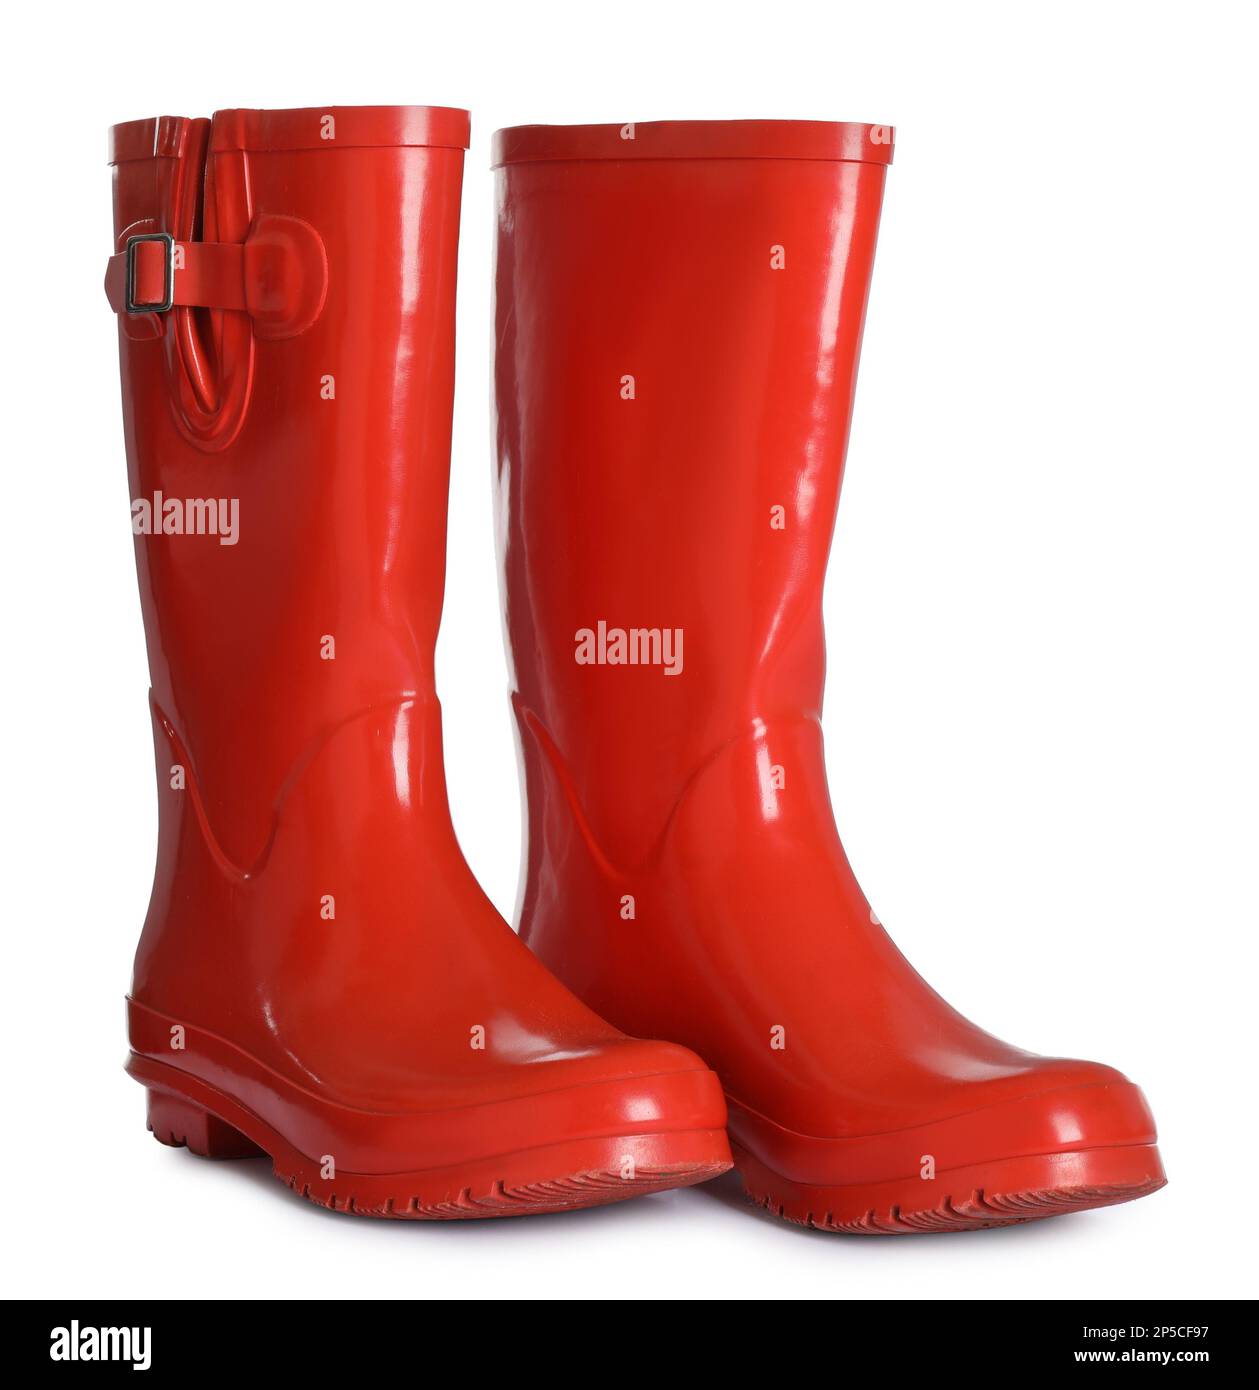 Modern red rubber boots isolated on white Stock Photo - Alamy